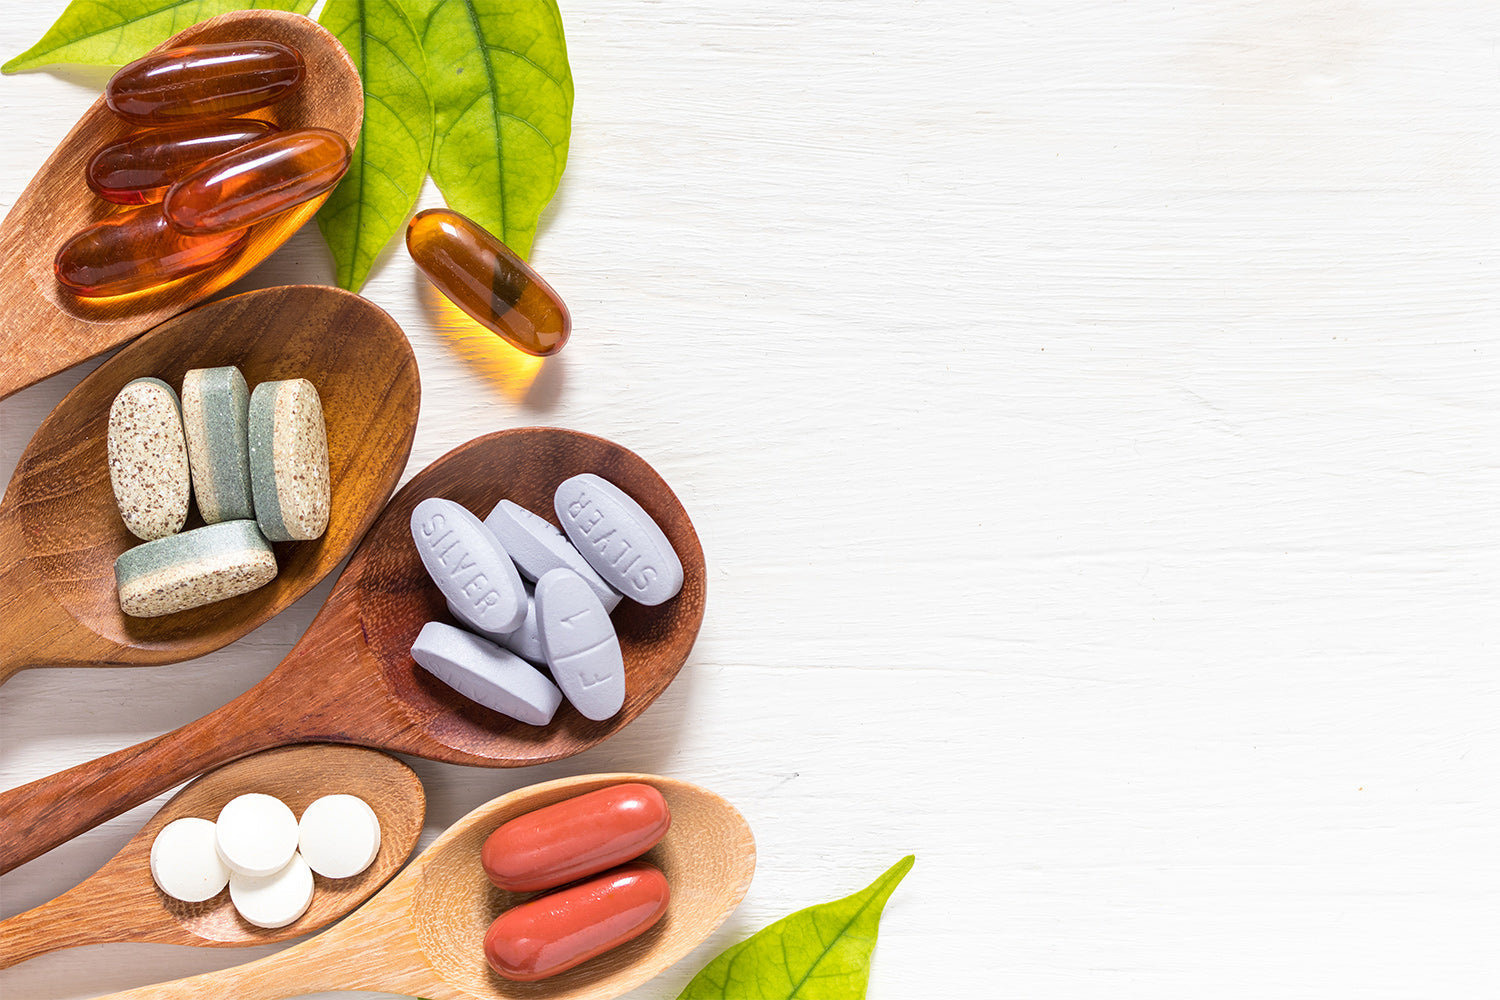 The Top 3 Vitamins for Healthy Skin